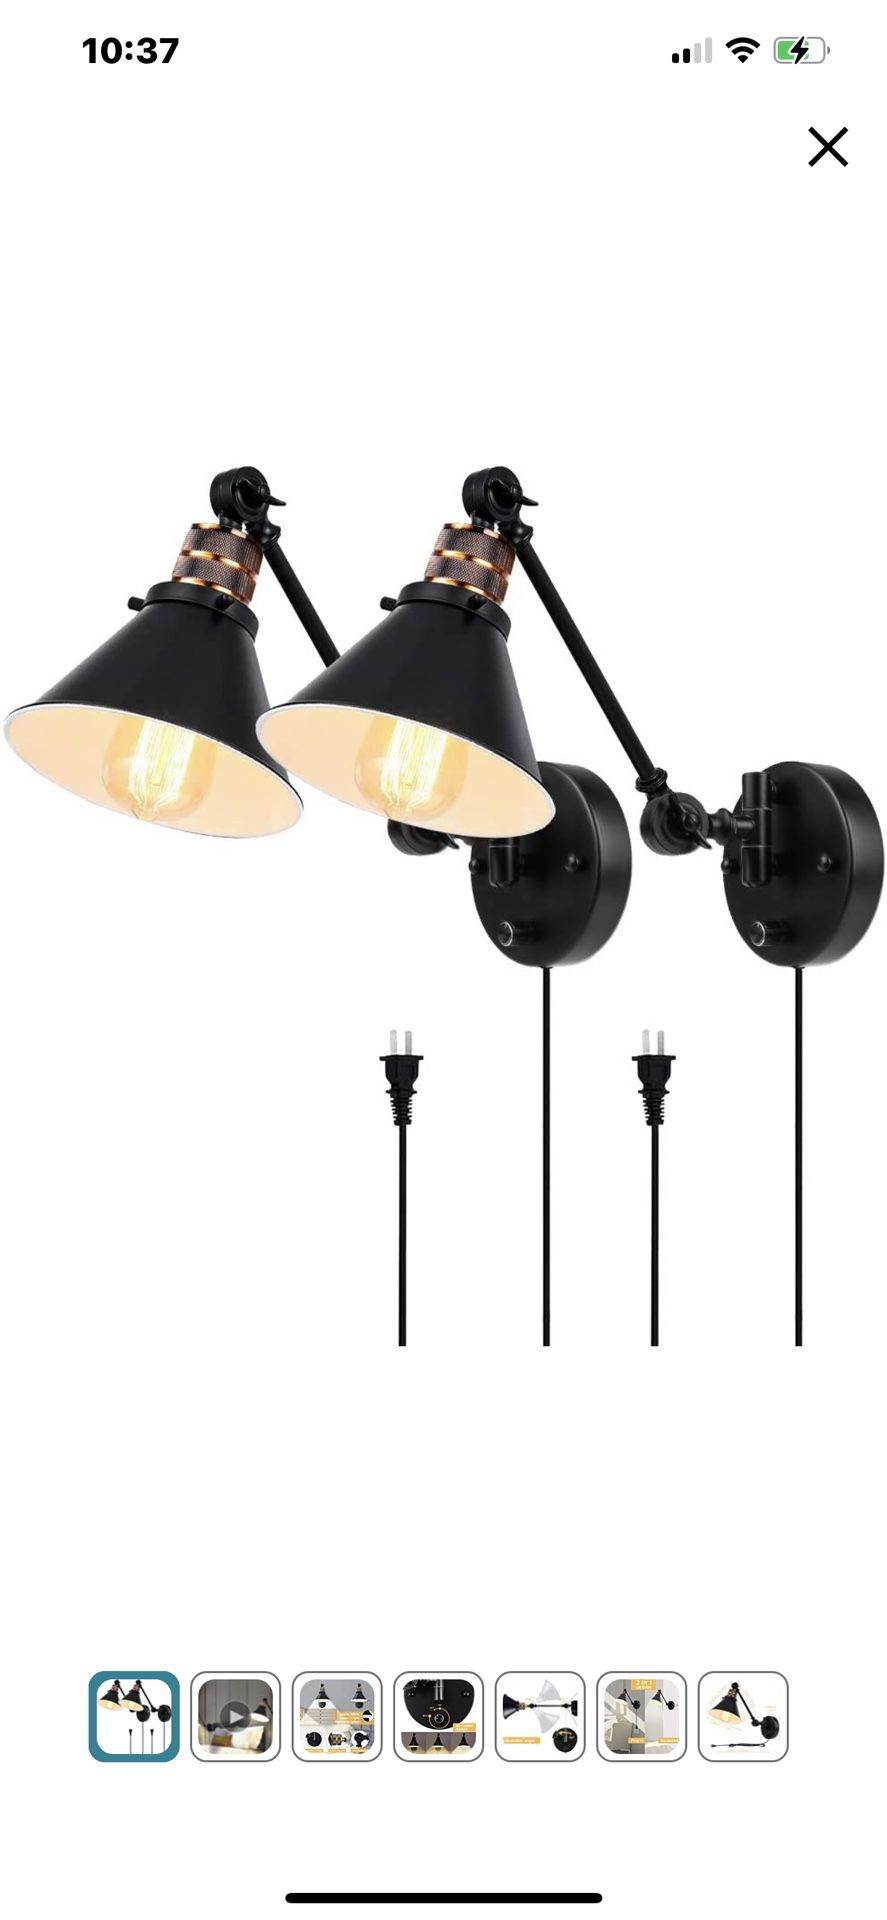 Plug in Wall Sconces Set of 2, PARTPHONER Swing Arm Wall Lamp with Dimmable On Off Switch, Metal Black Vintage Industrial Wall Mounted Lighting Readin